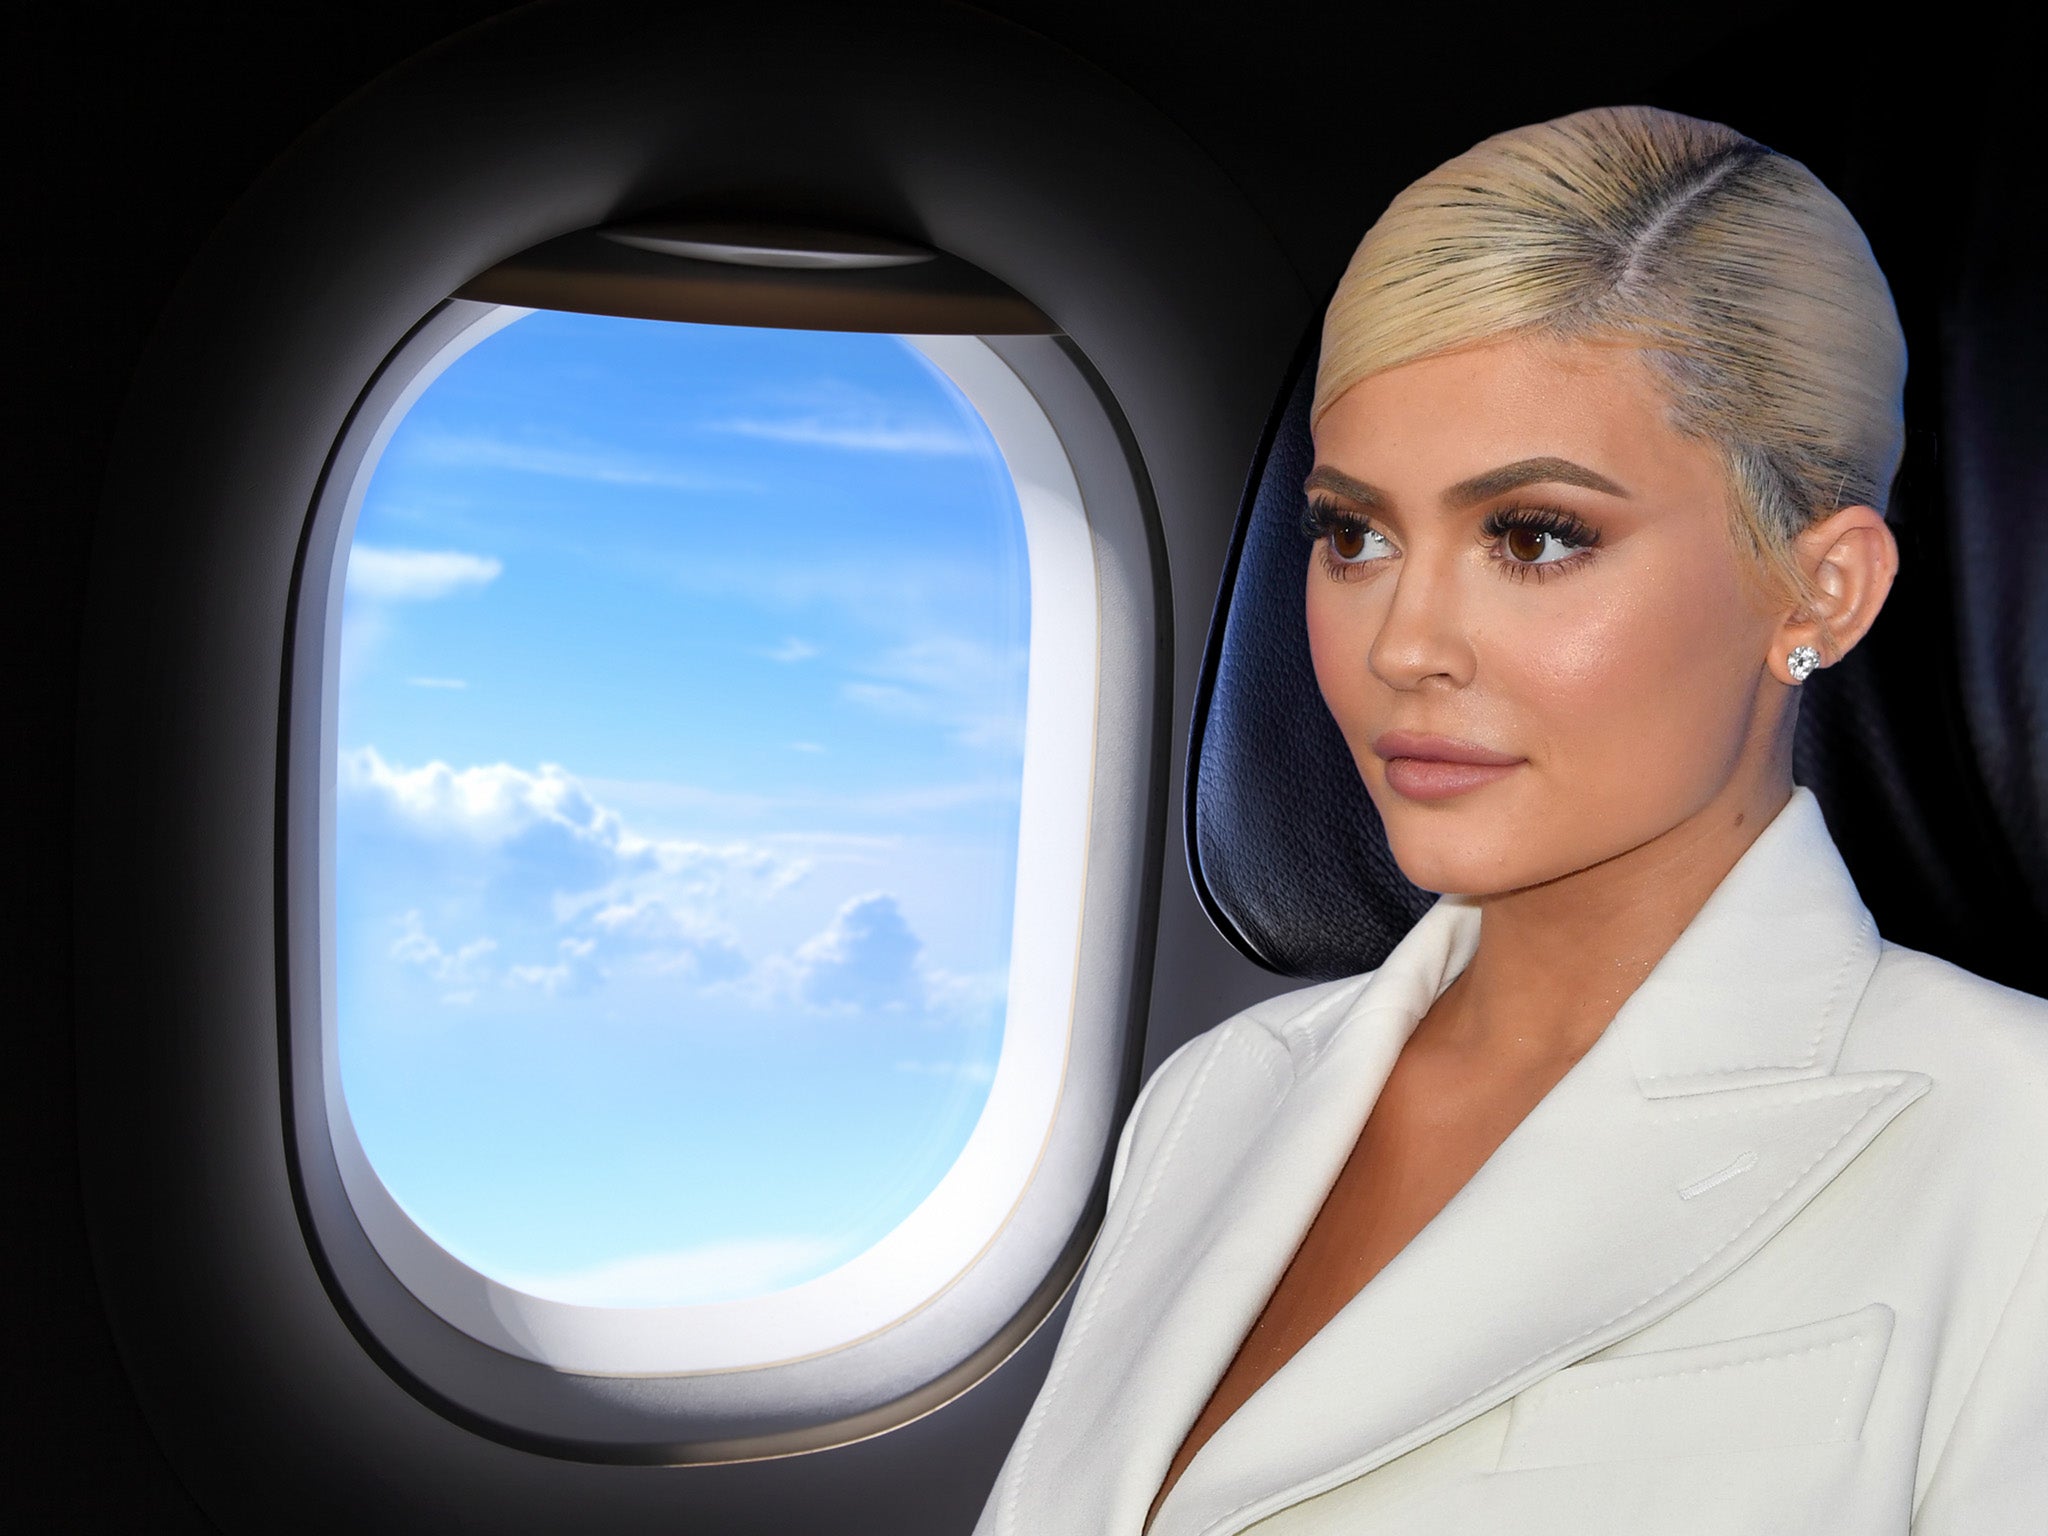 The mammoth impact of Kylie Jenner’s alleged travel choices don’t seem to matter to her